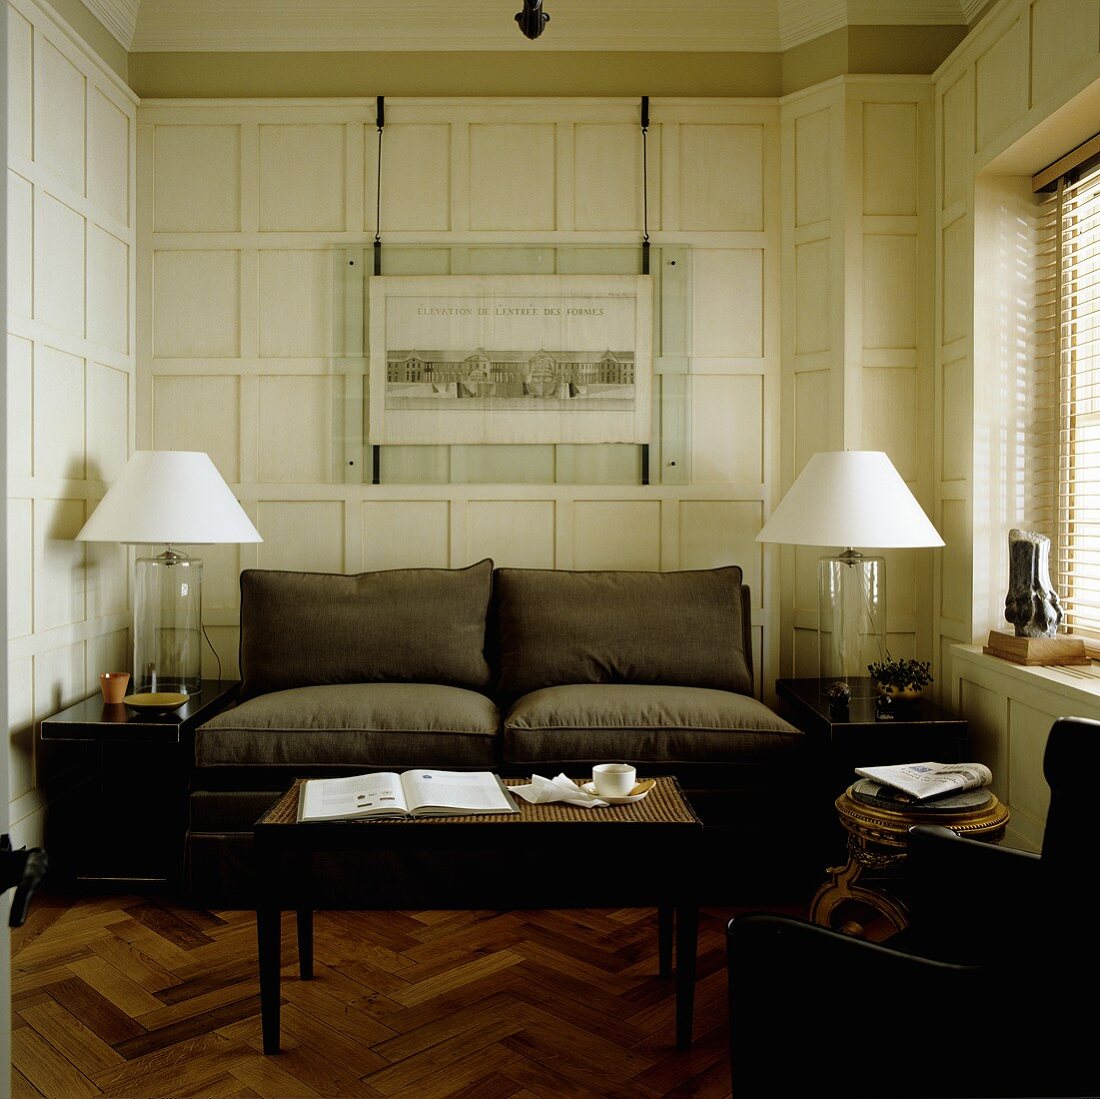 A brown two-seater sofa and table lamps in front of a white wood panelled wall